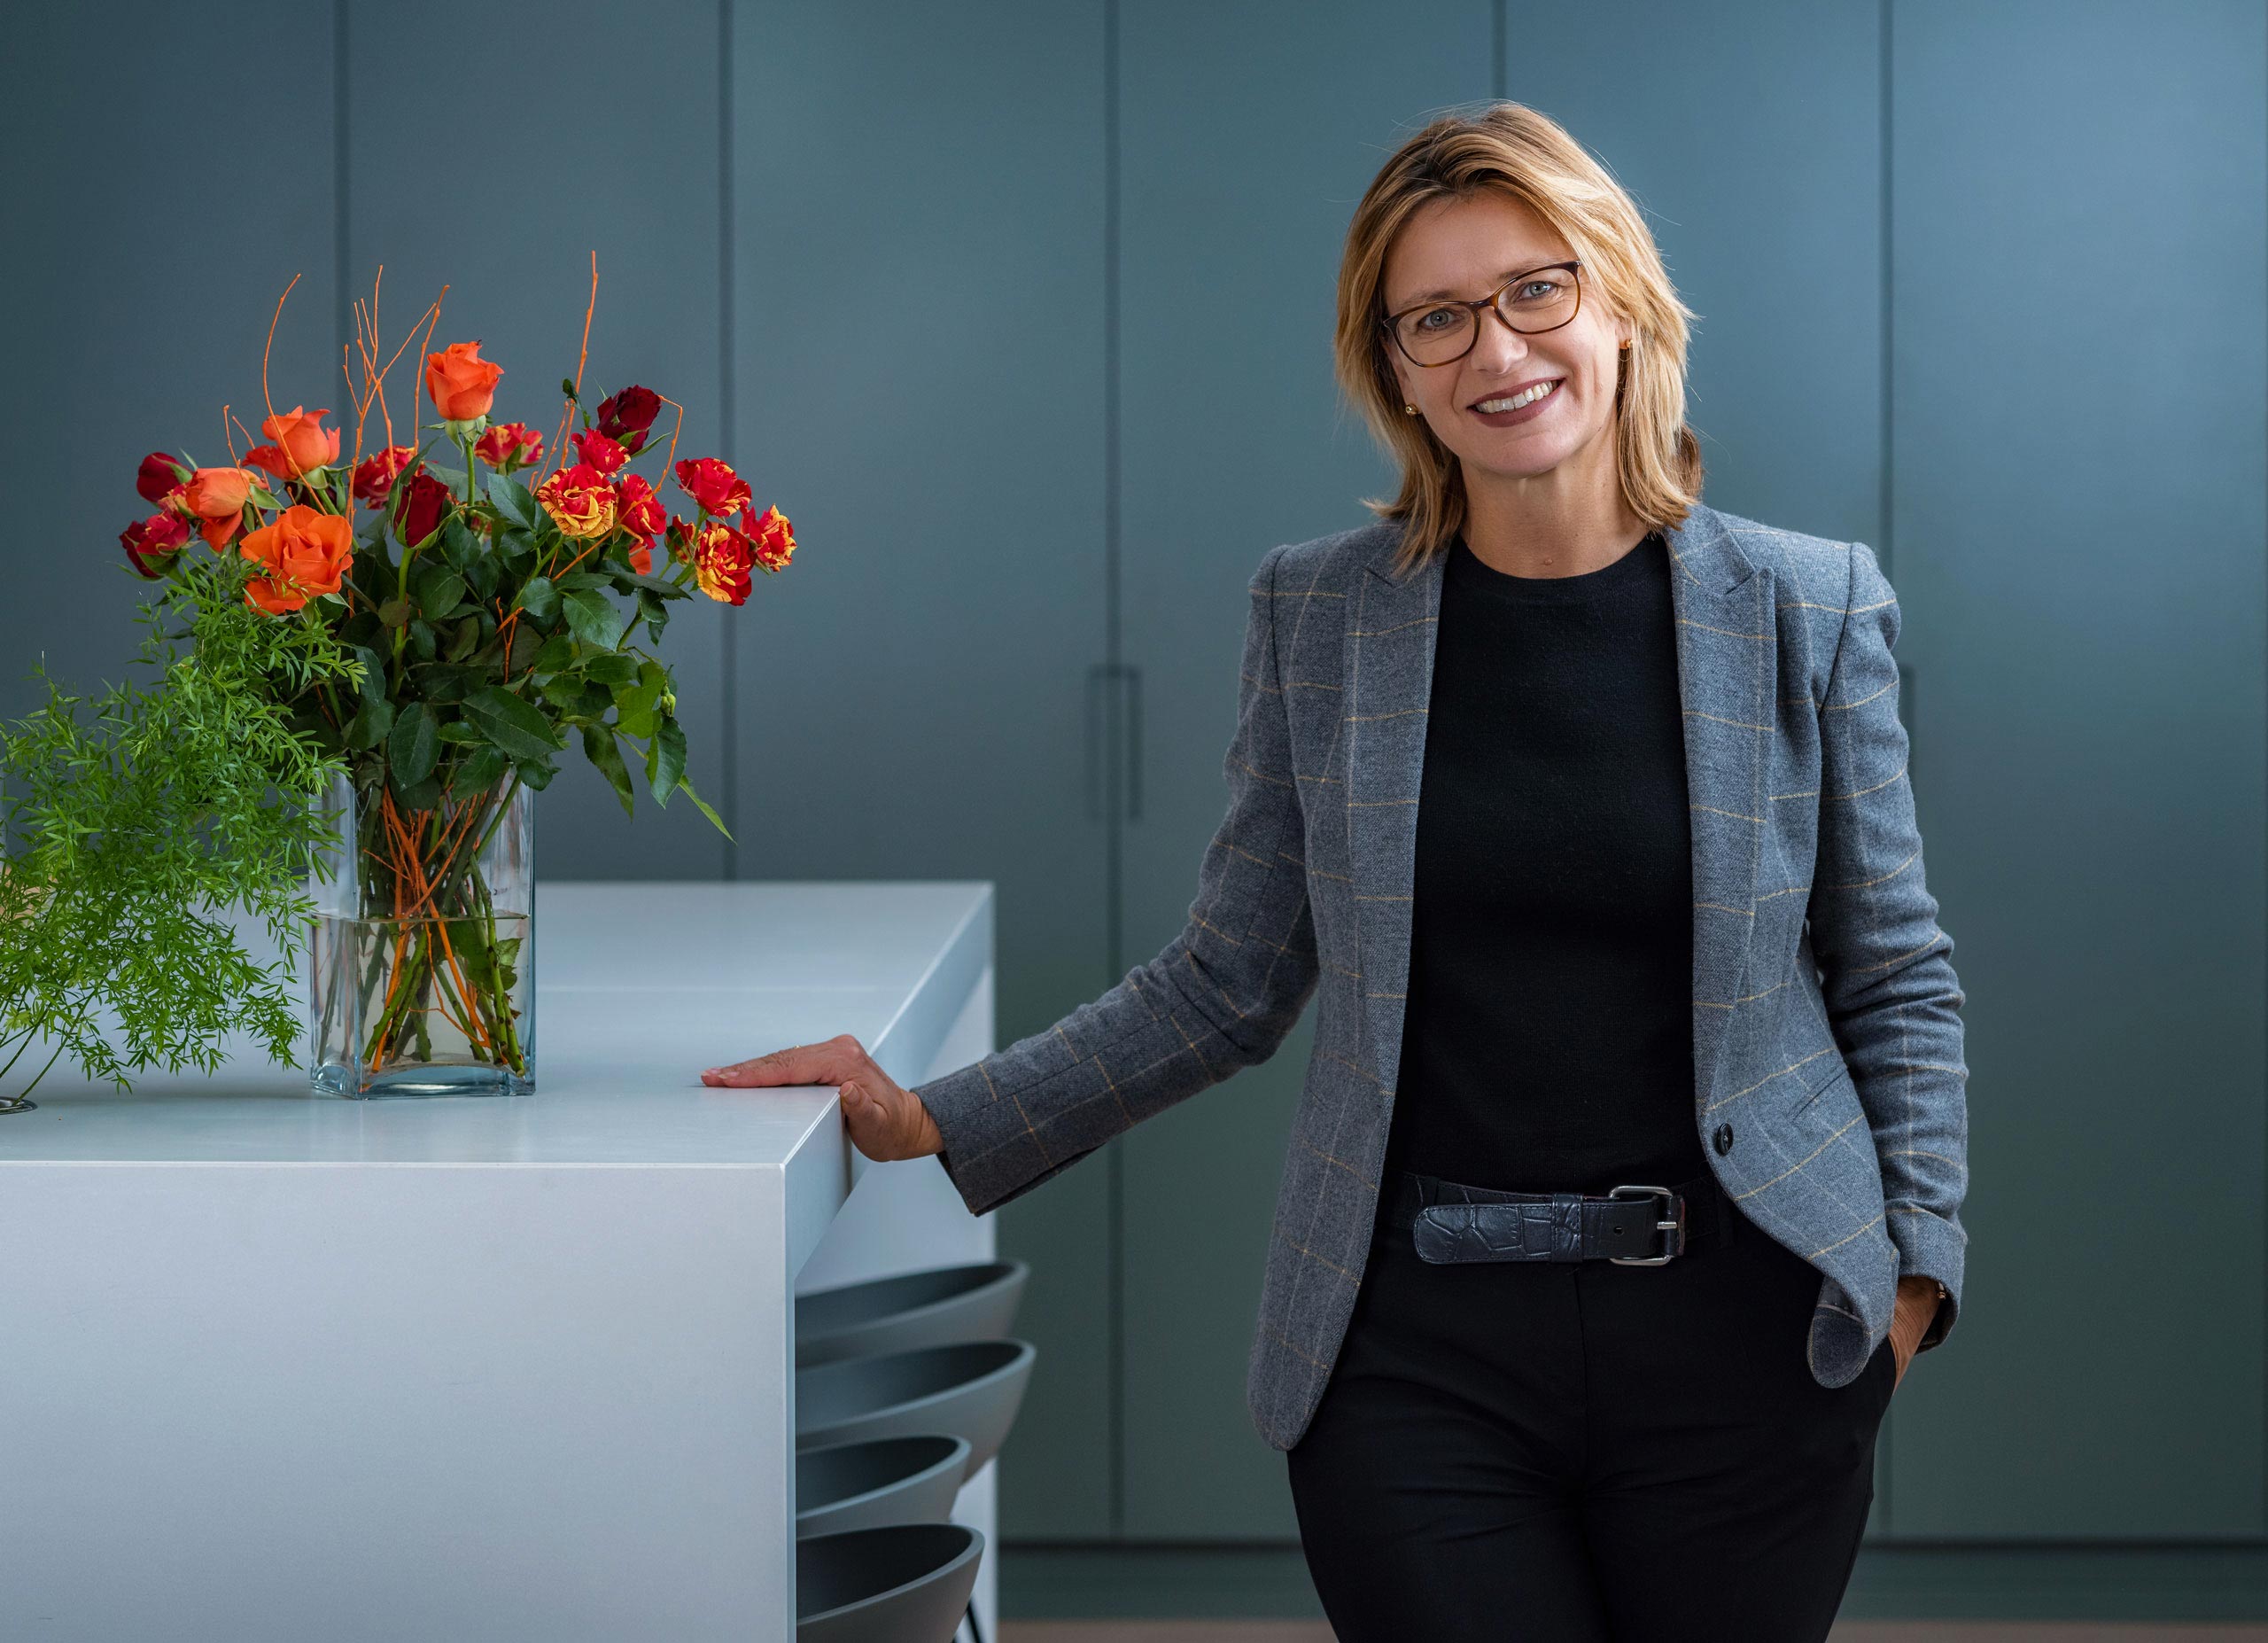 A woman managing director of a large real estate communications company in London (ING Media) stands in her office wearing a smart jacket and glasses. There are red roses in a vase on the breakfast bar next to her.